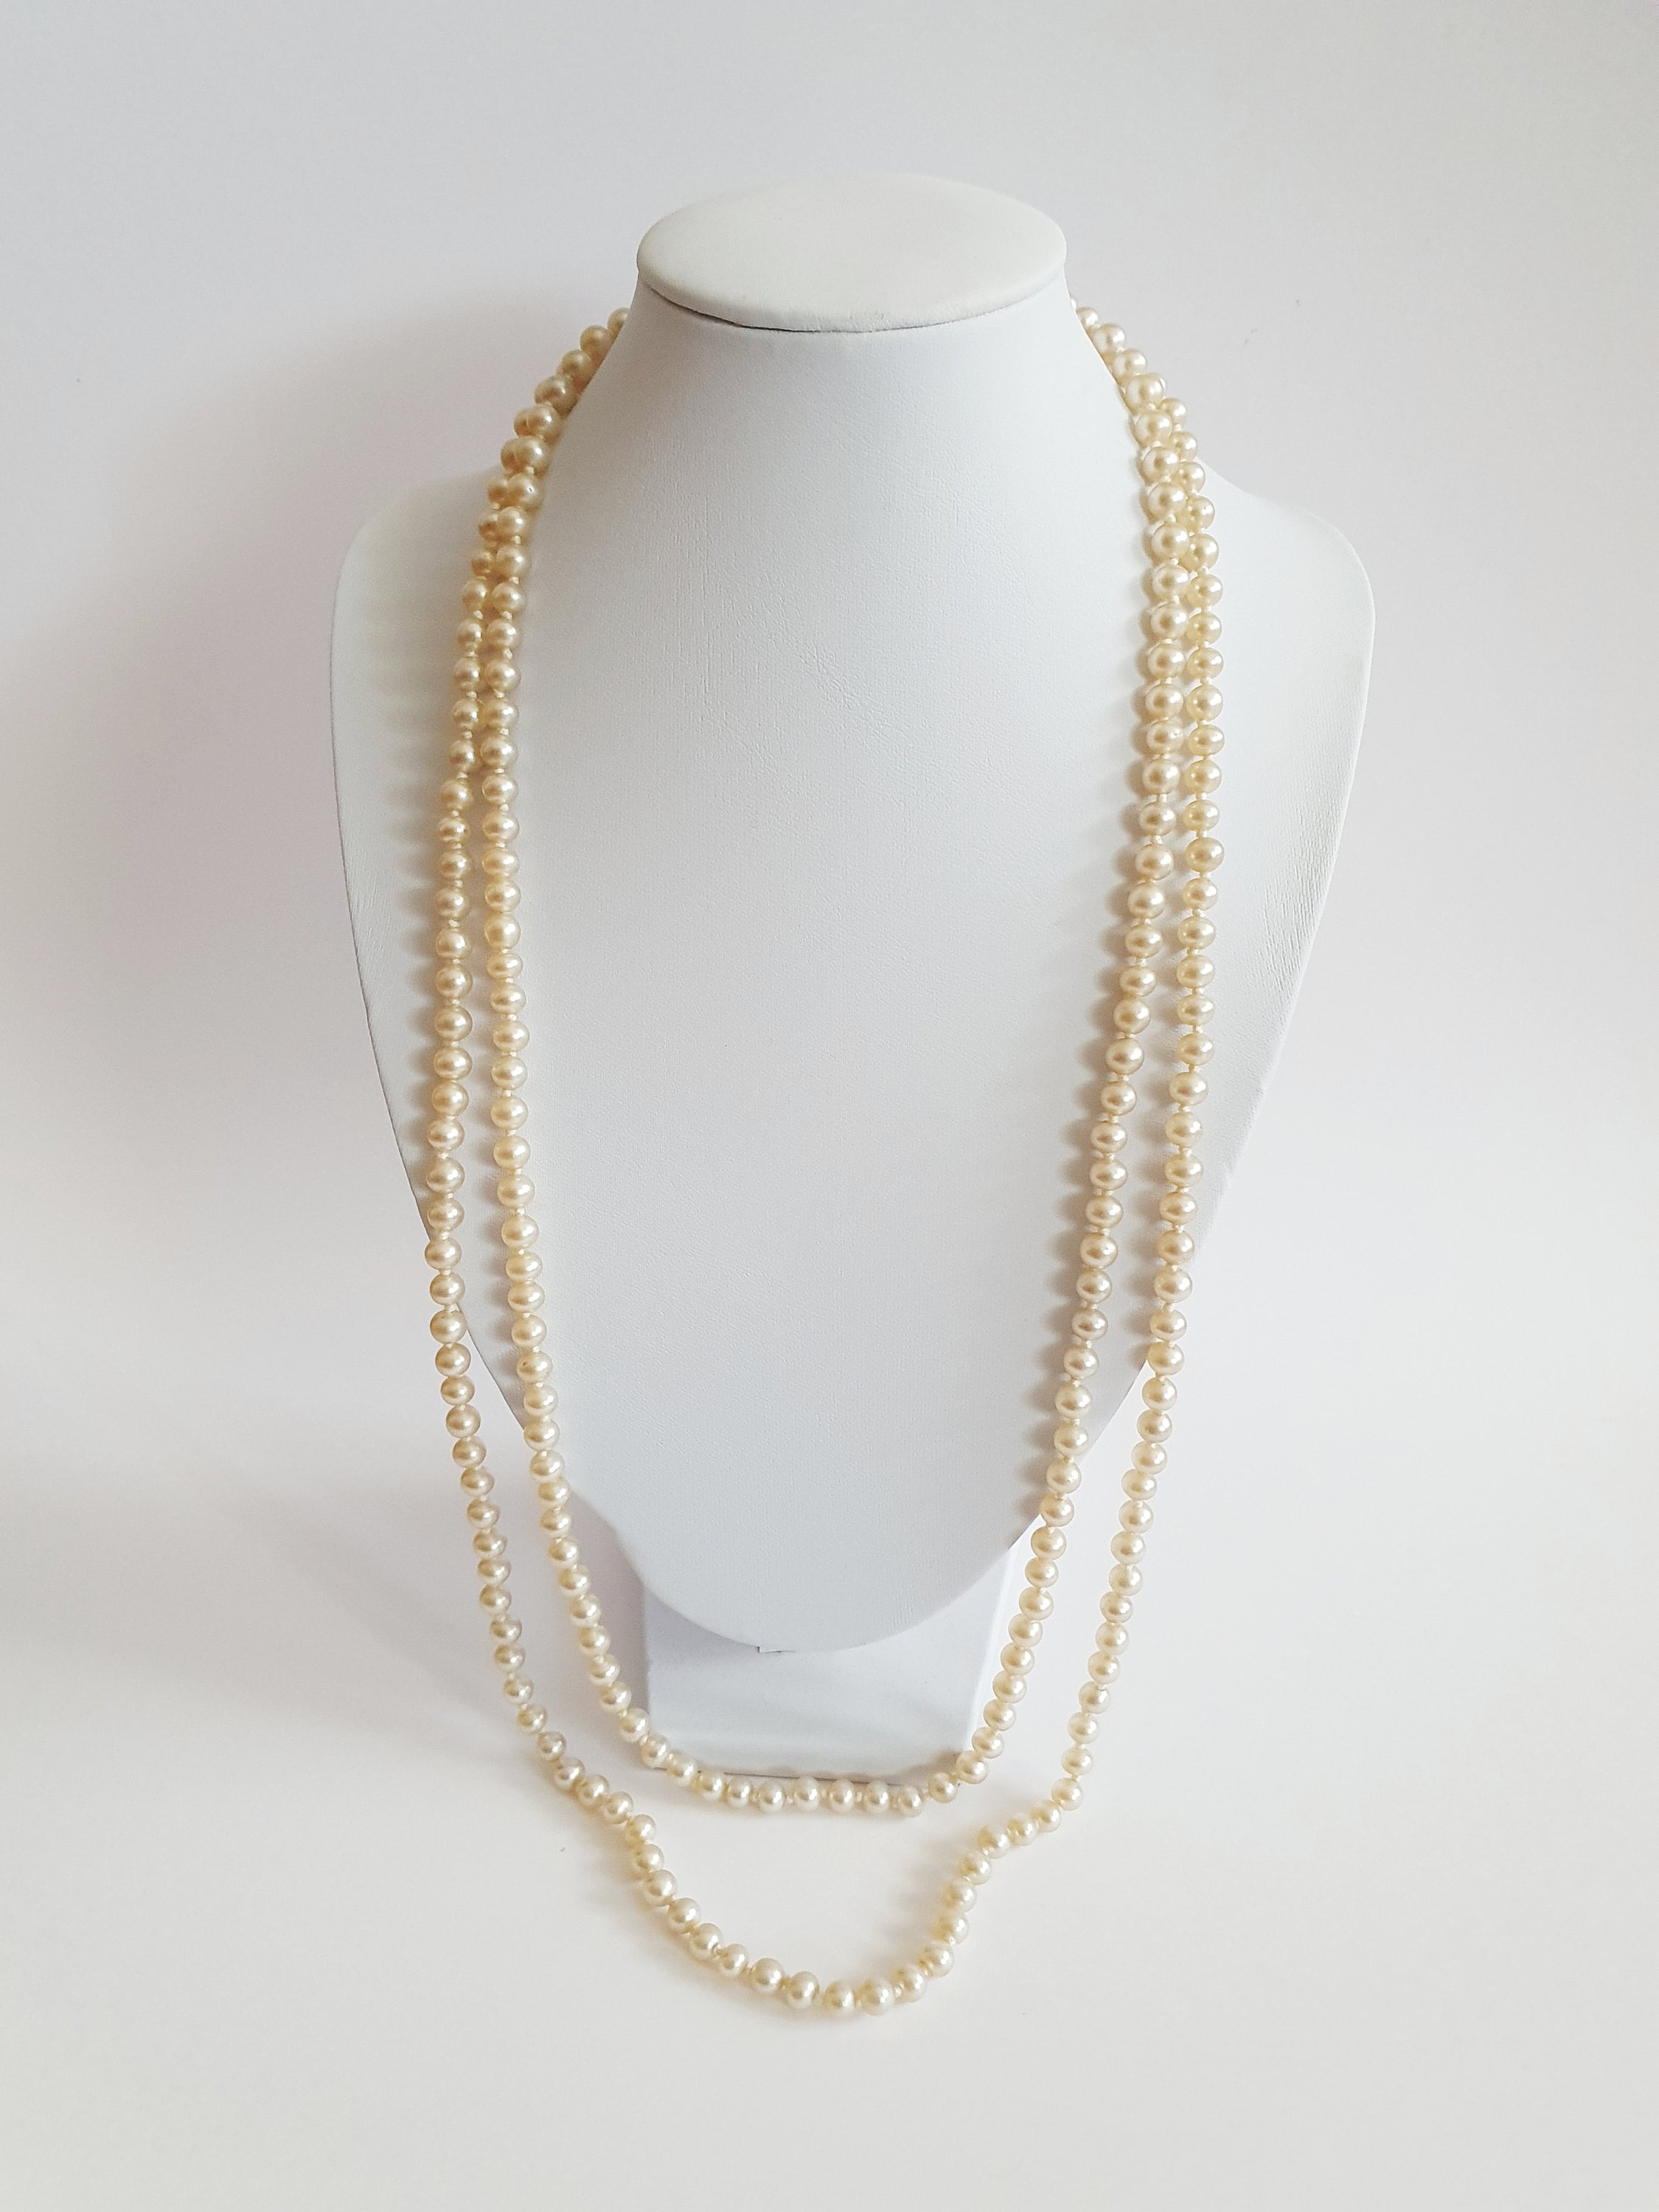 Vintage 1940s Pearl & Crystal Lariat Necklace – Foxy Couture Carmel